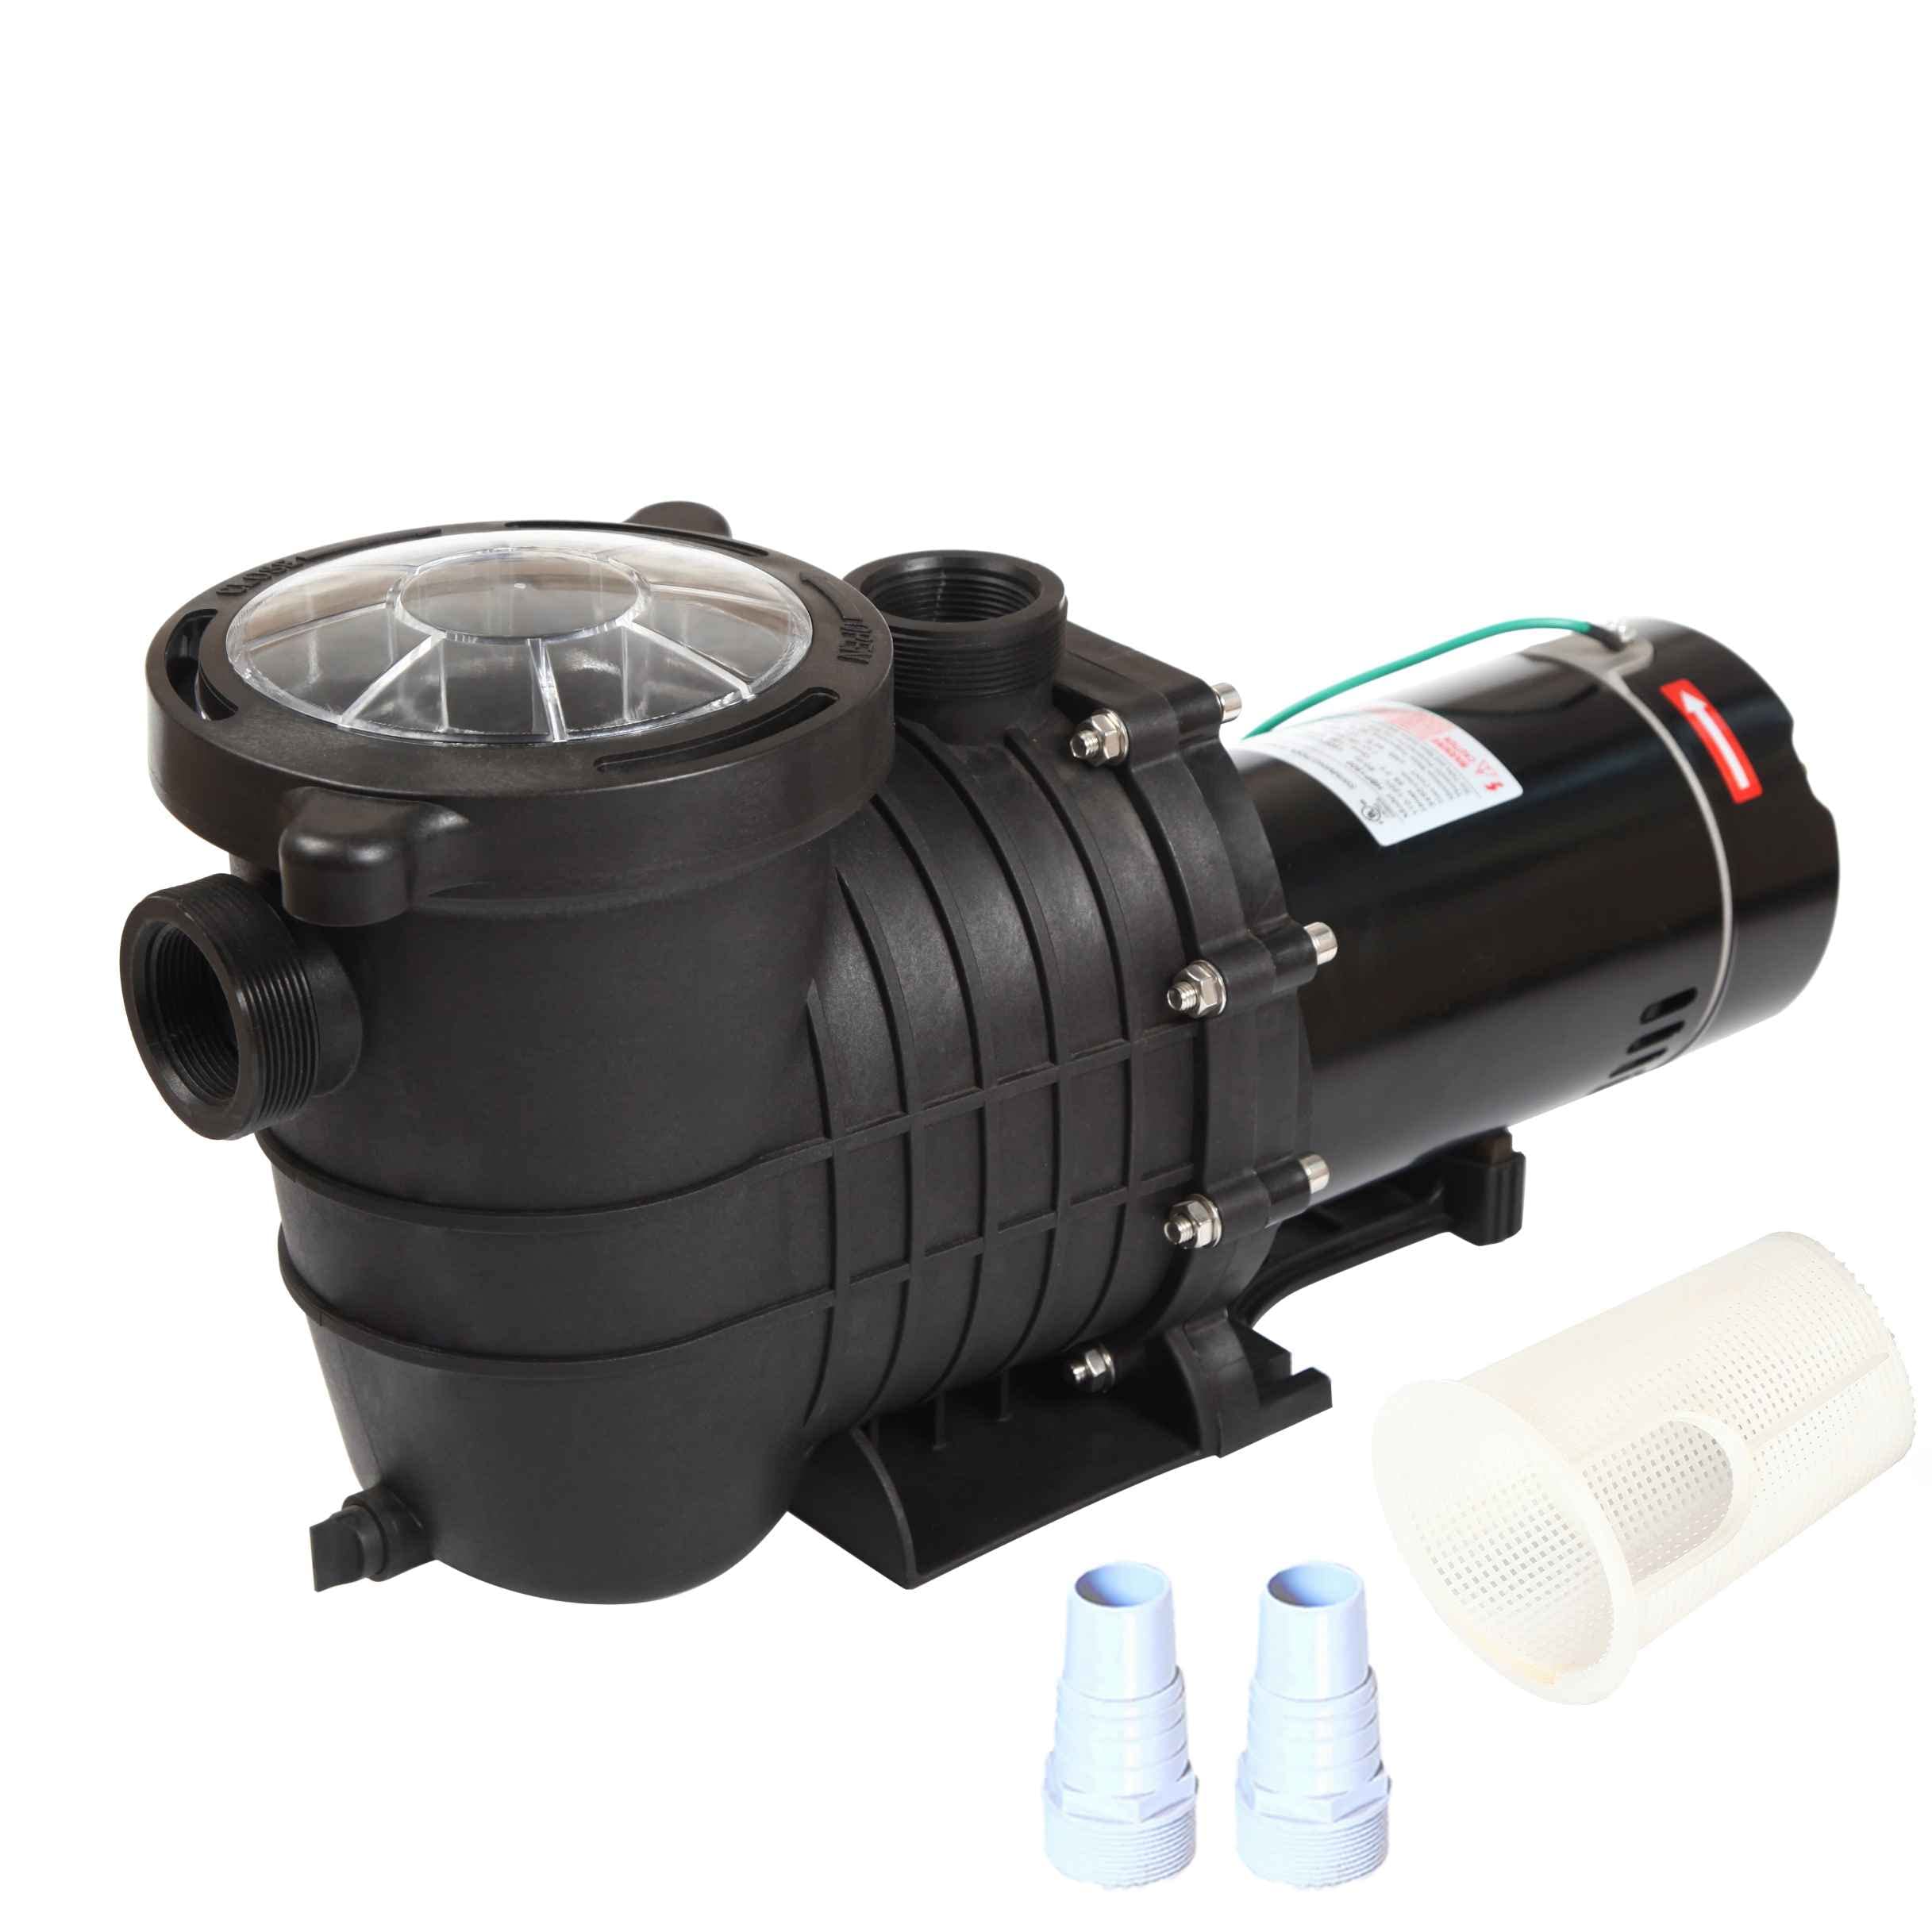 TOPWAY 2HP 110v Swimming Pool Pump 111gPM Filter garden lnground and Above ground Pools Water Pump